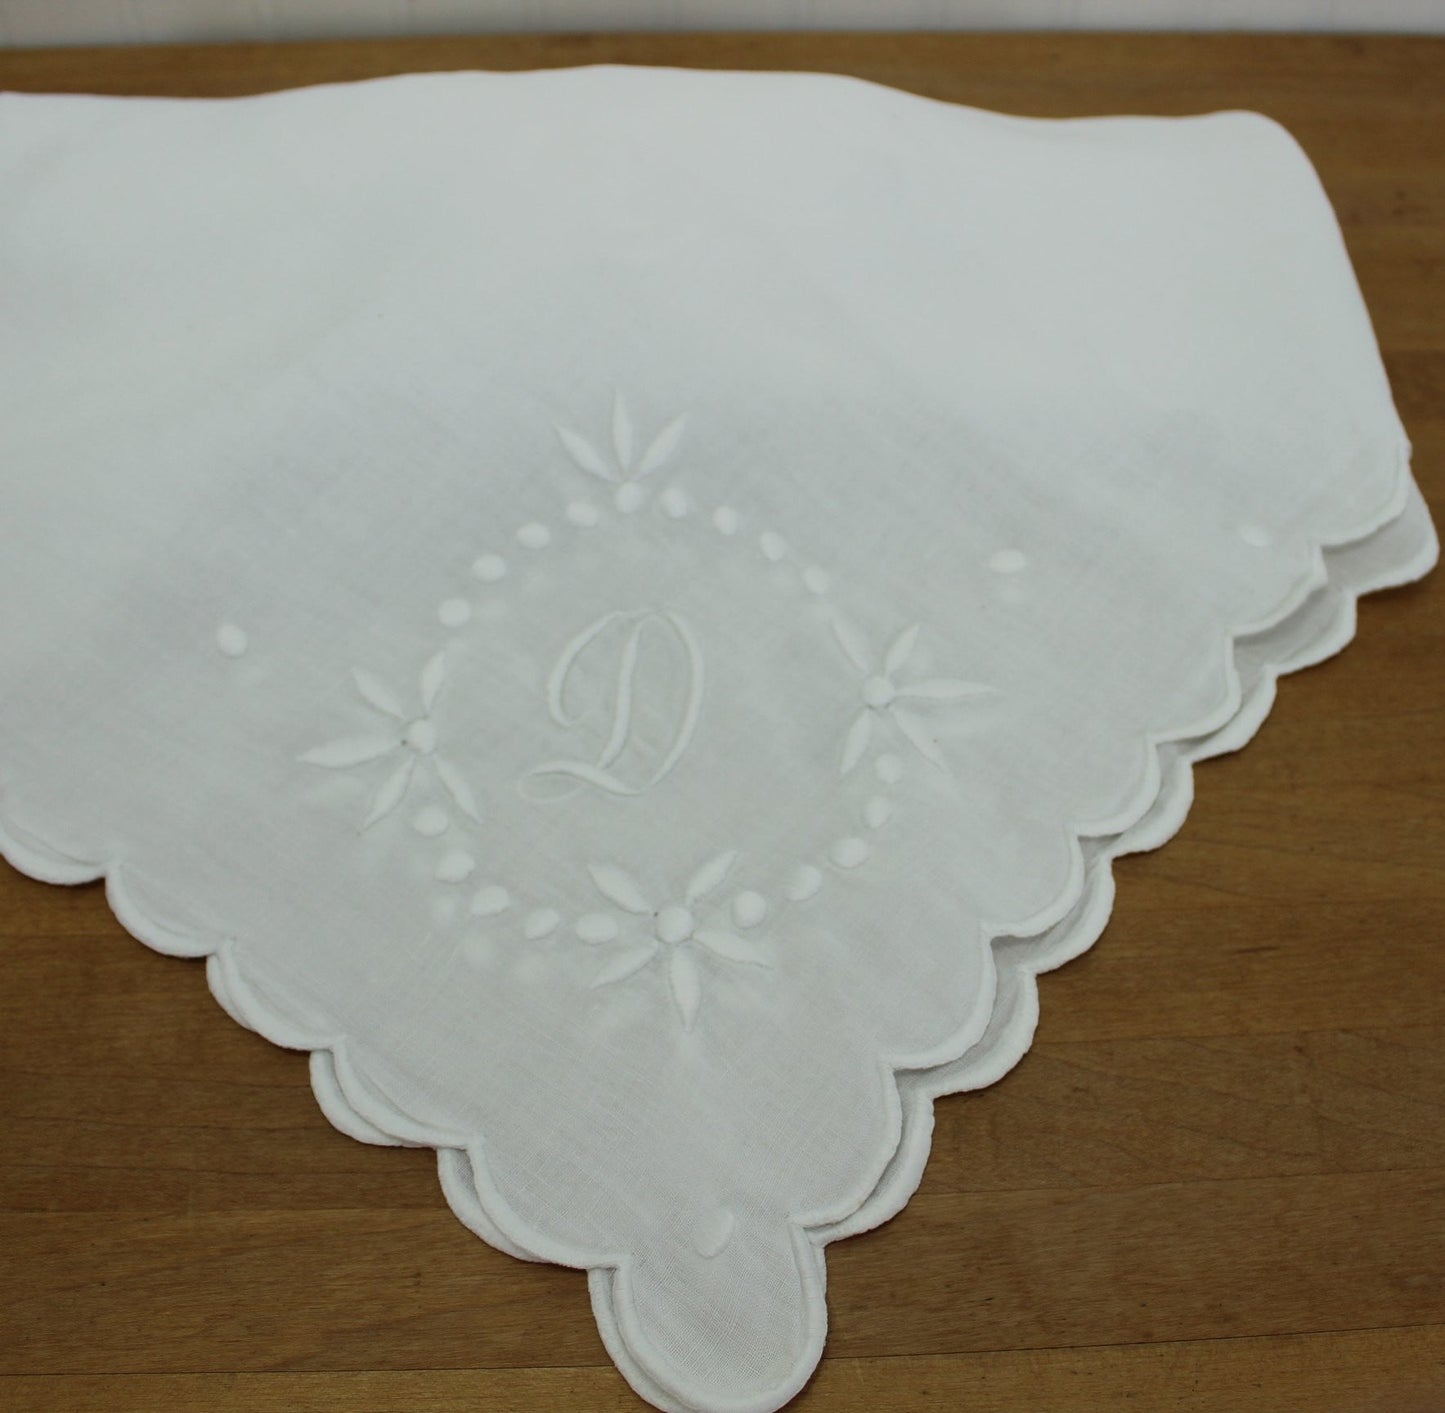 Antique Small White Linen Table Cloth - Early 1900s - Monogram "D" Floral exquisite handiwork embroidery